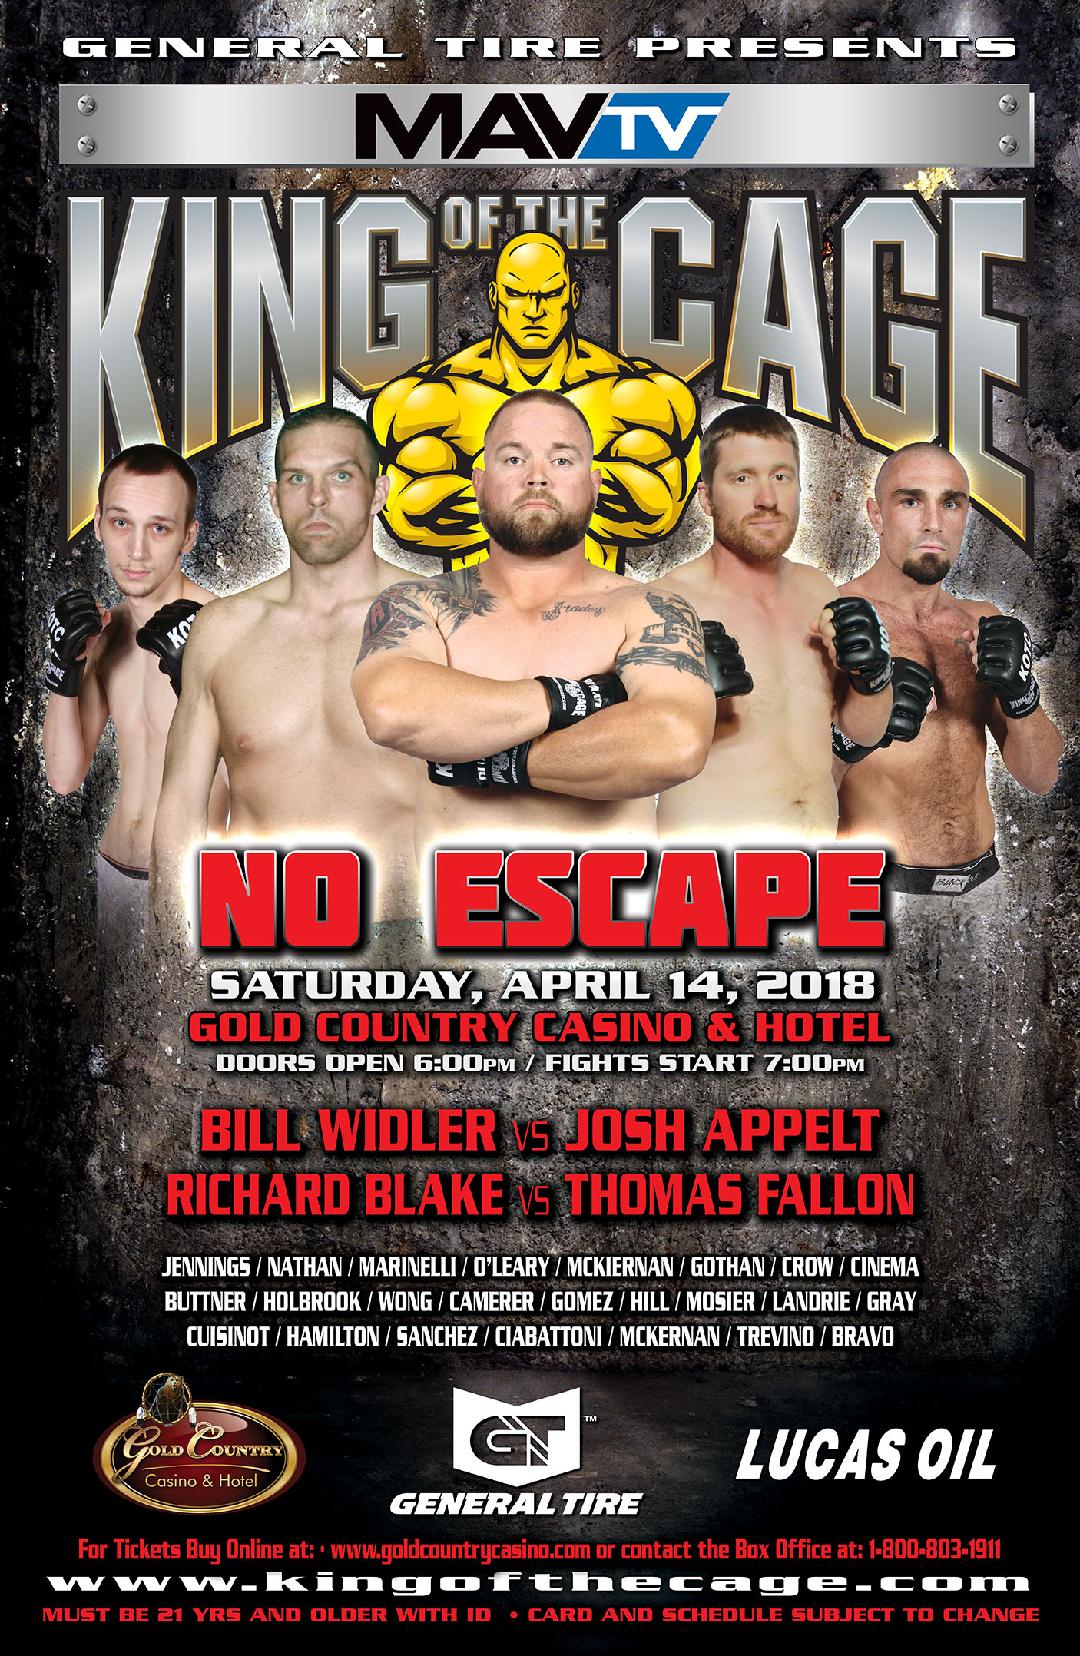 King of the Cage Announces Main Fight Card for Gold Country Casino & Hotel on April 14 for “NO ESCAPE”